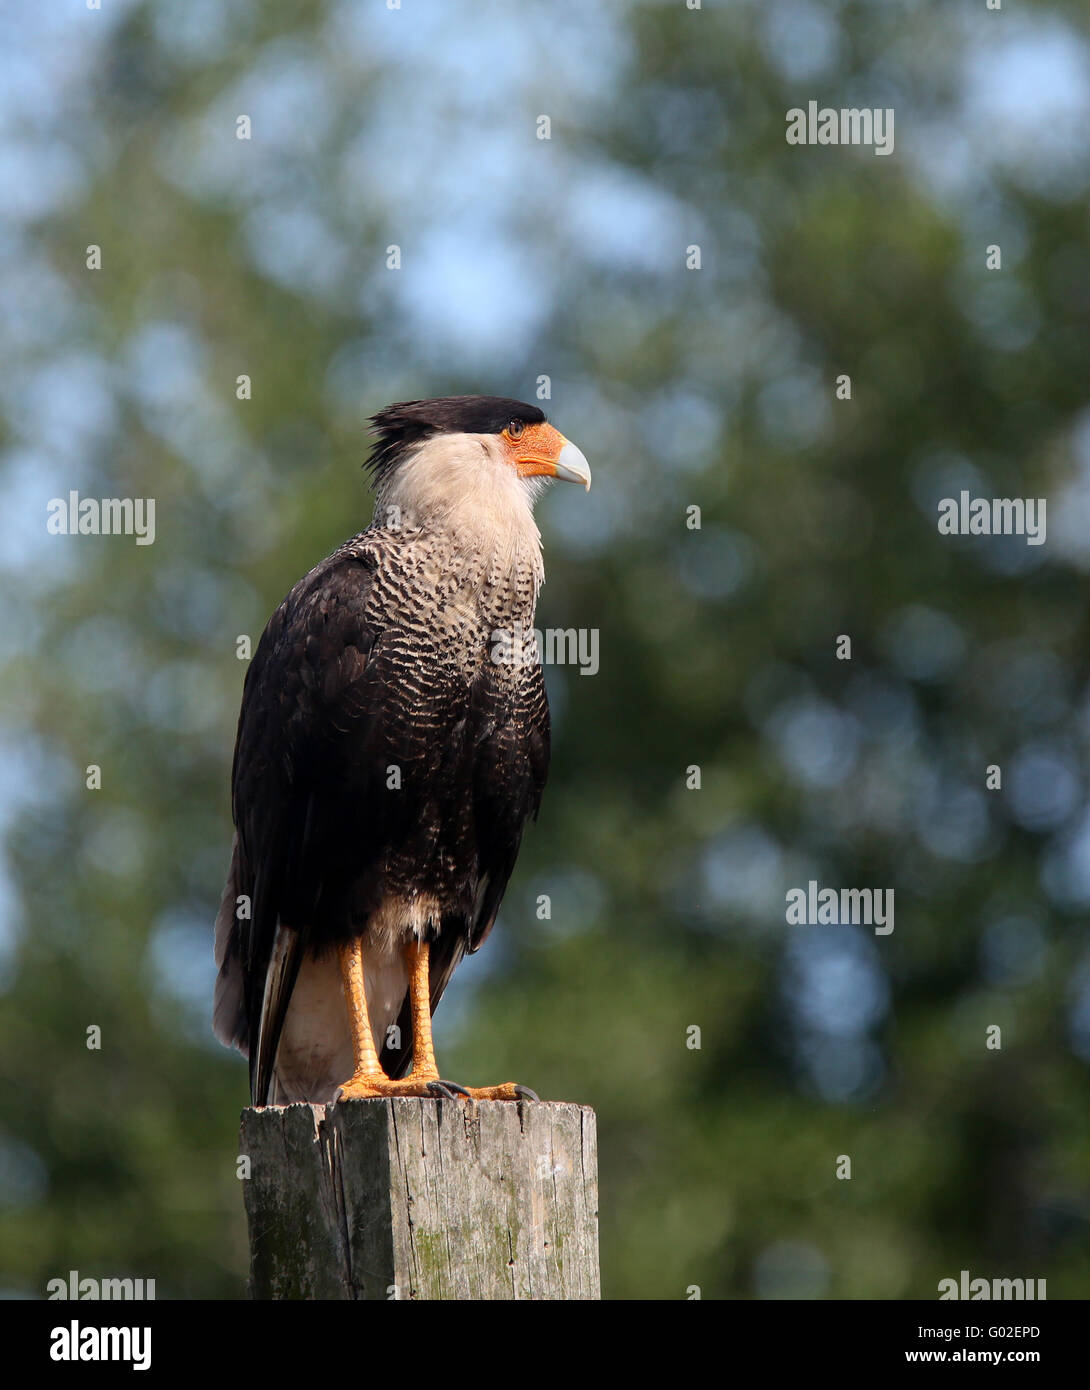 A Crested Caracara on a fence post in rural Florida. April 2016 Stock Photo